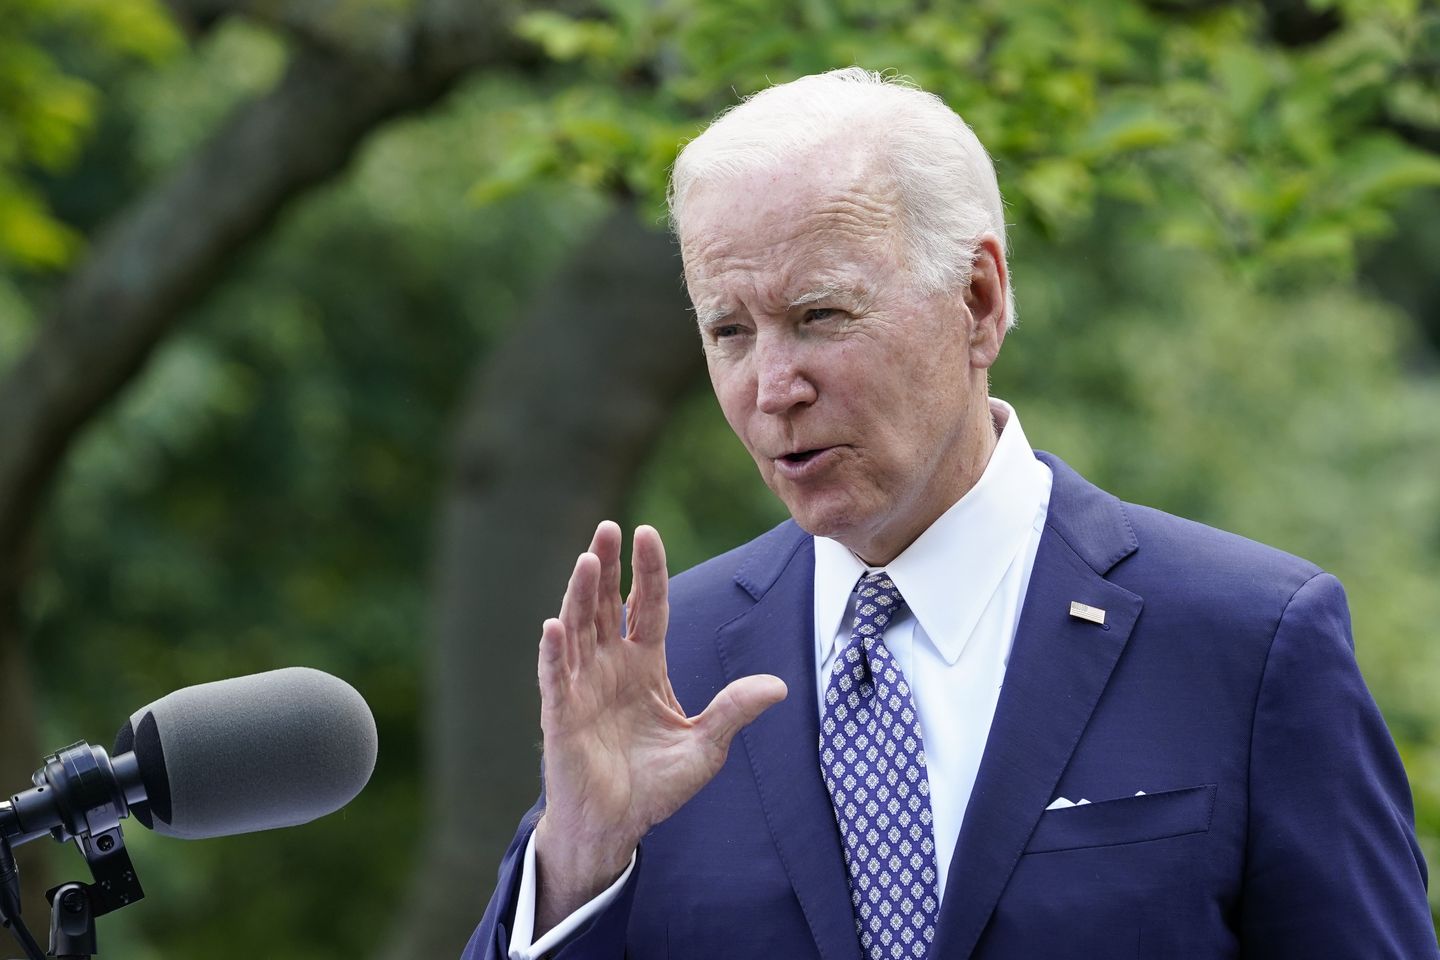 Biden's craven fear-mongering over COVID-19 is all about money